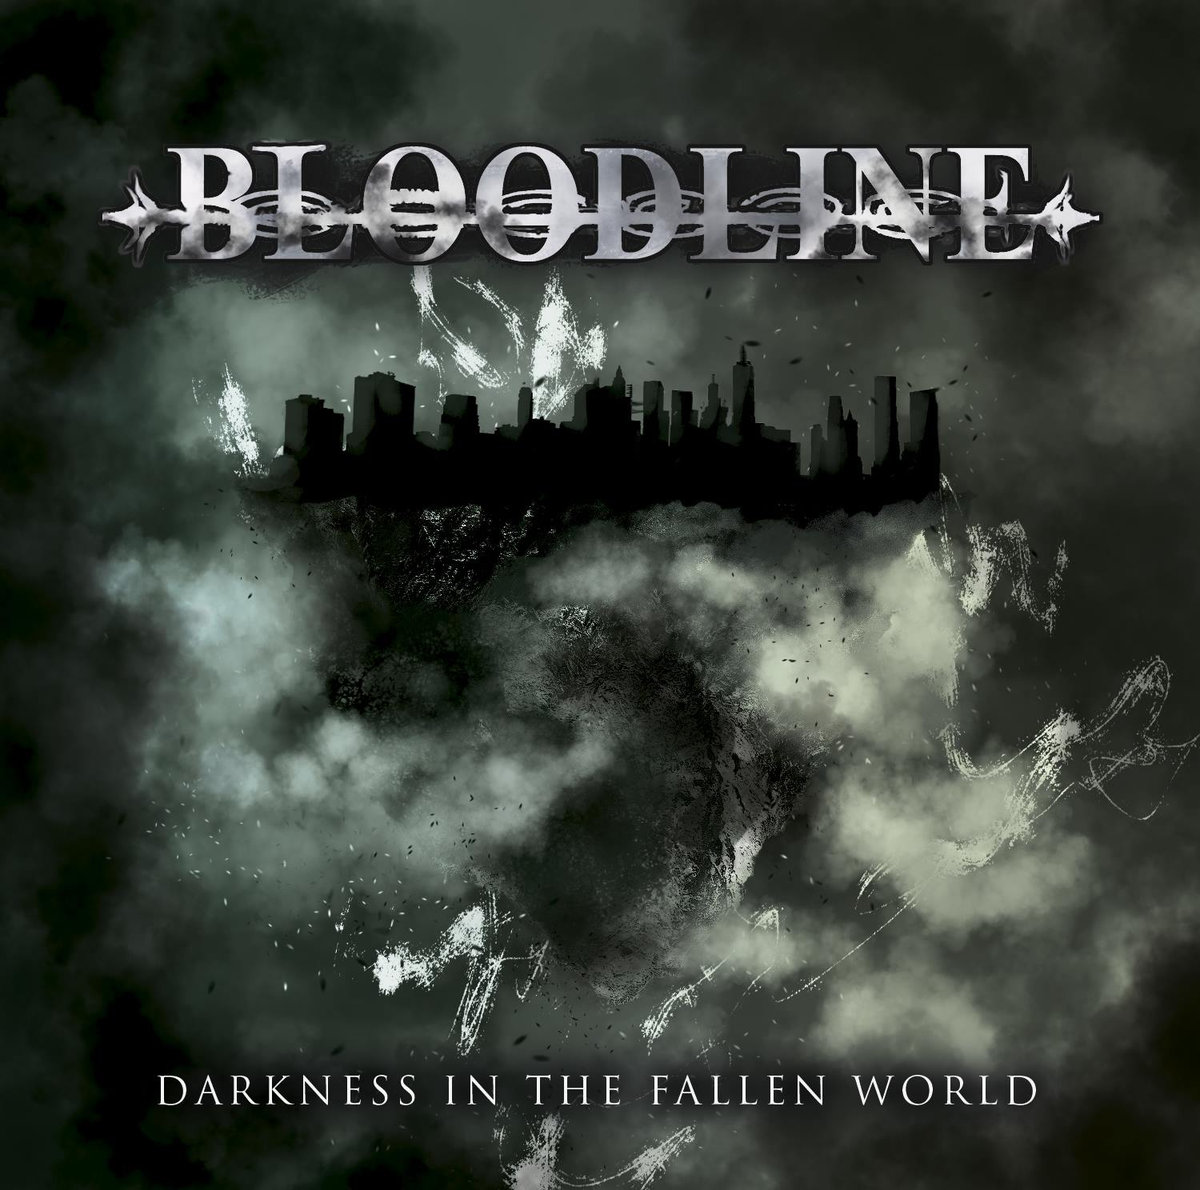 The world is falling. Bloodline - Darkness in the Fallen World (2018). Modern Melodic Death Metal. Nazareth: the Fallen World. The Darkness has Fallen.